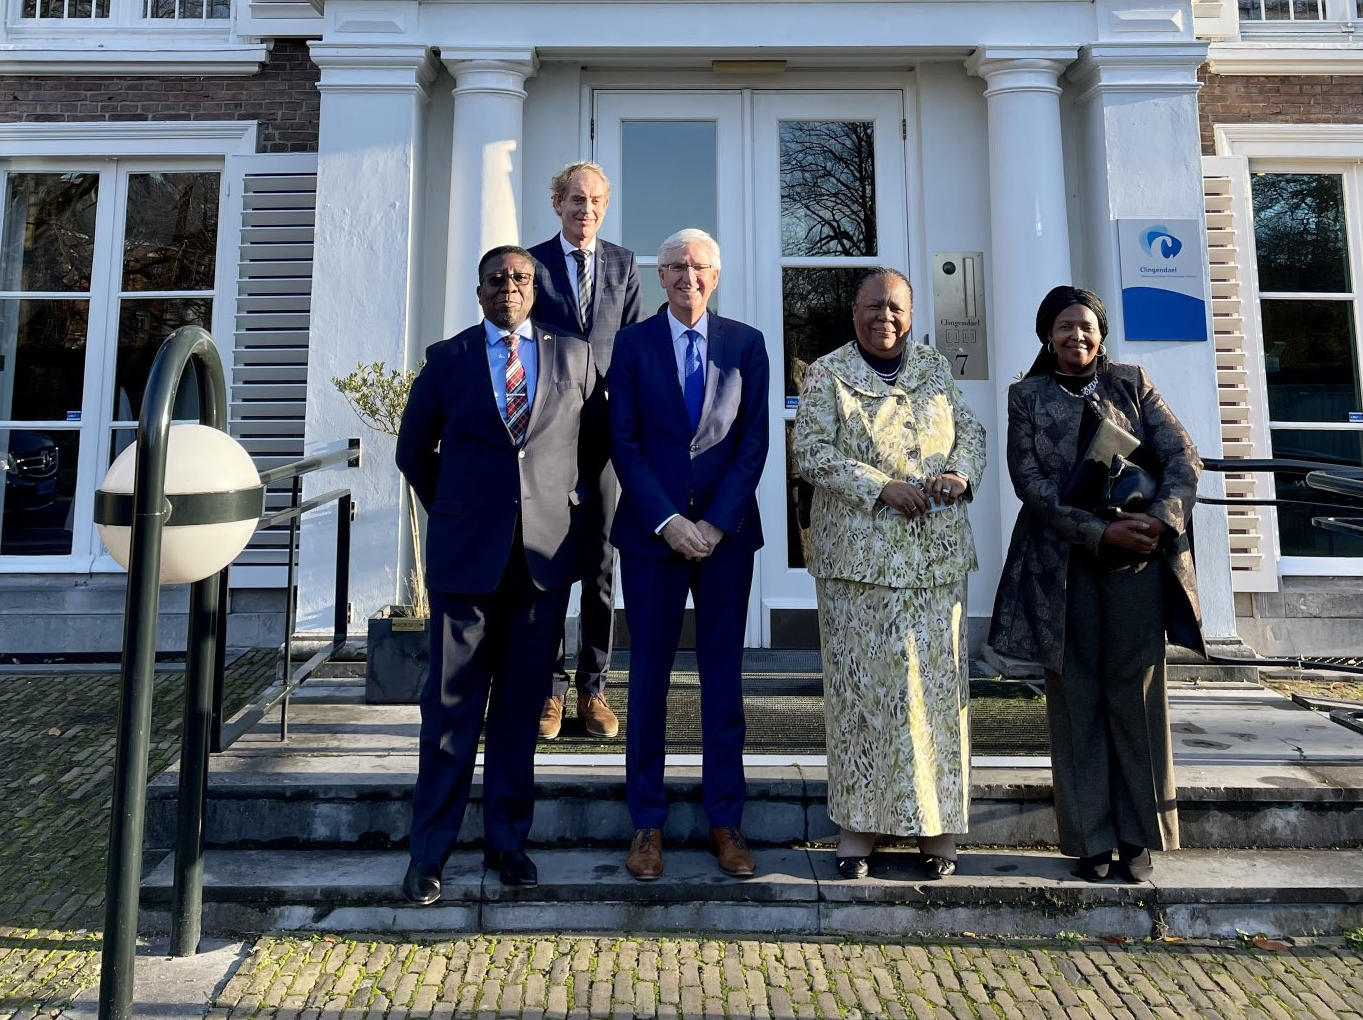 Minister Naledi Pandor’s (South Africa), her delegation and Peter Haasbroek and Ron from Clingendael in front of our Huys